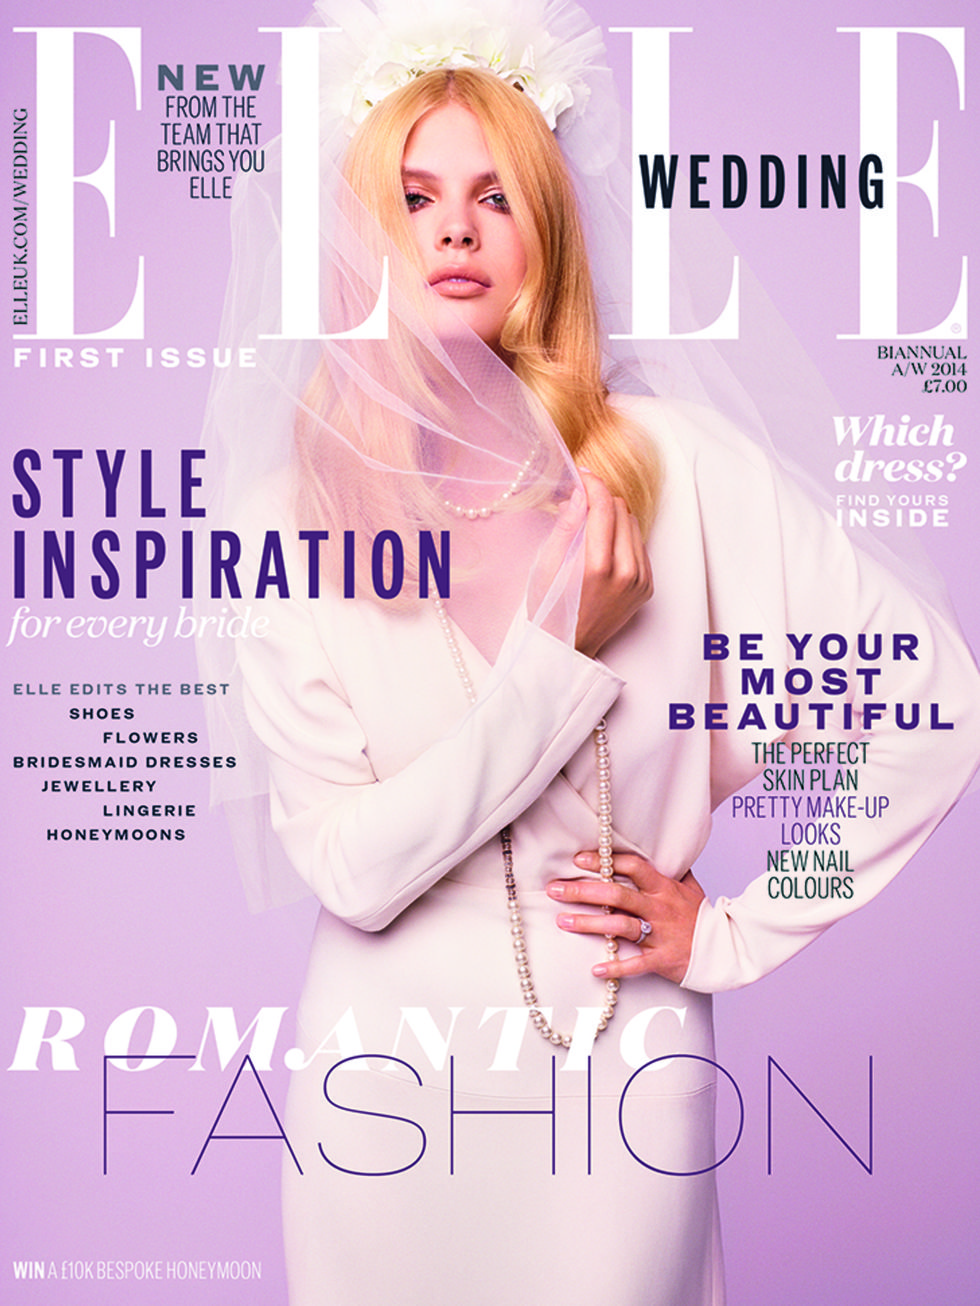 <p>The finished product, on-sale 9 September 2014.</p>

<p><a href="http://www.hearstmagazines.co.uk/elle/jes10067">Pre-order yours now!</a></p>